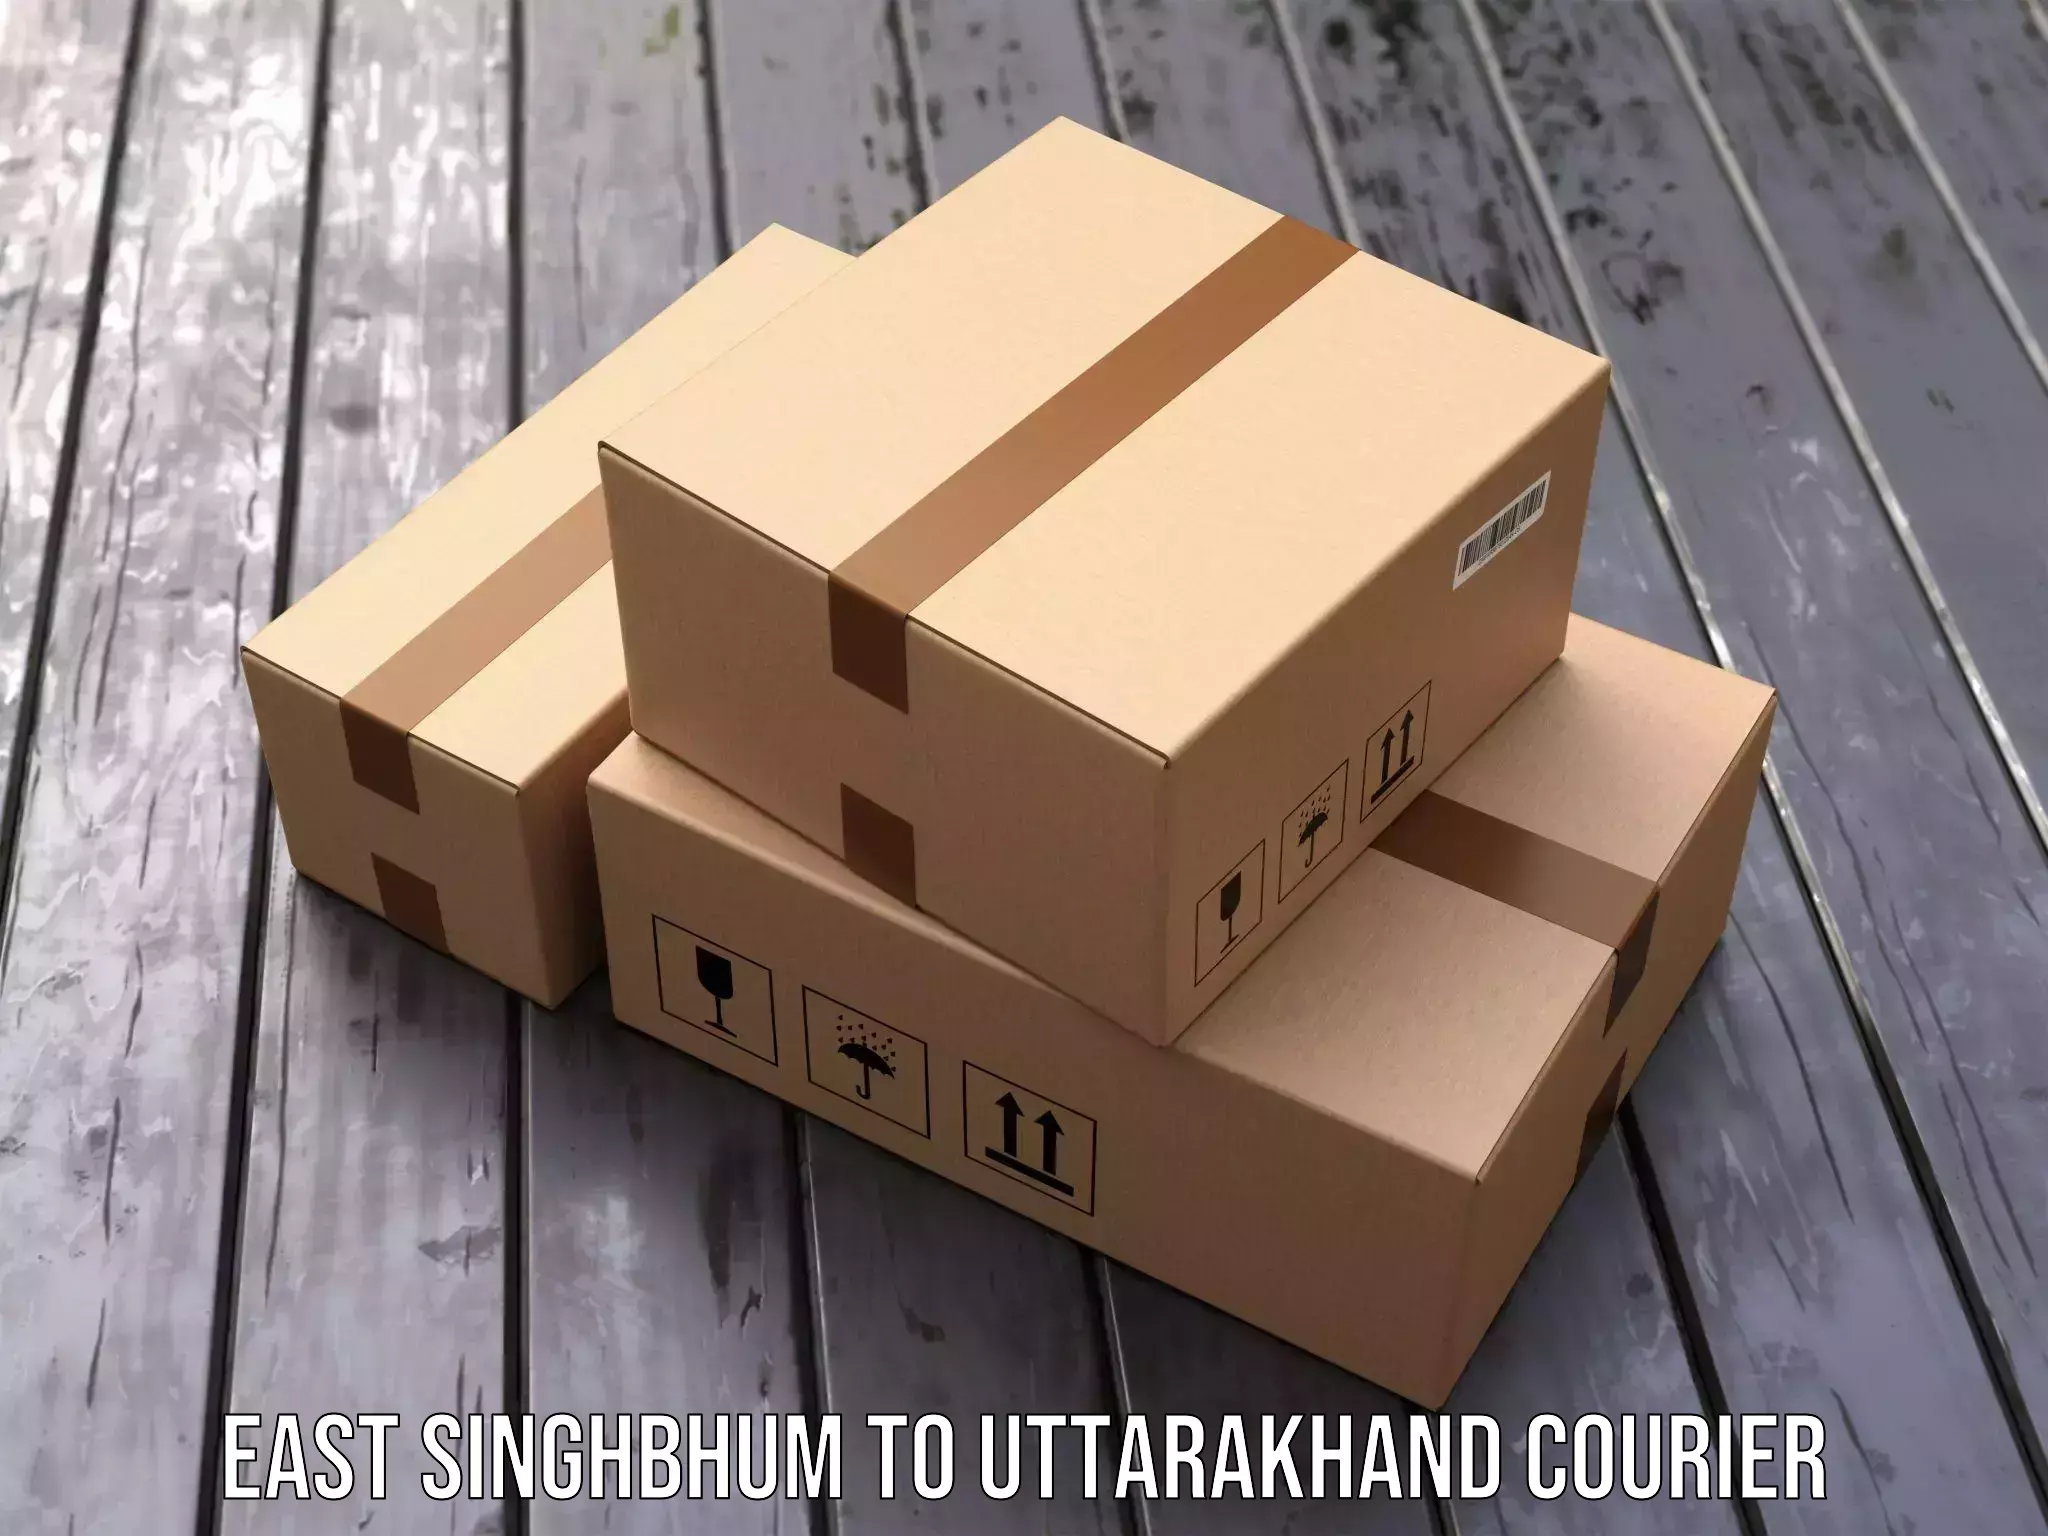 Seamless shipping experience in East Singhbhum to Dehradun